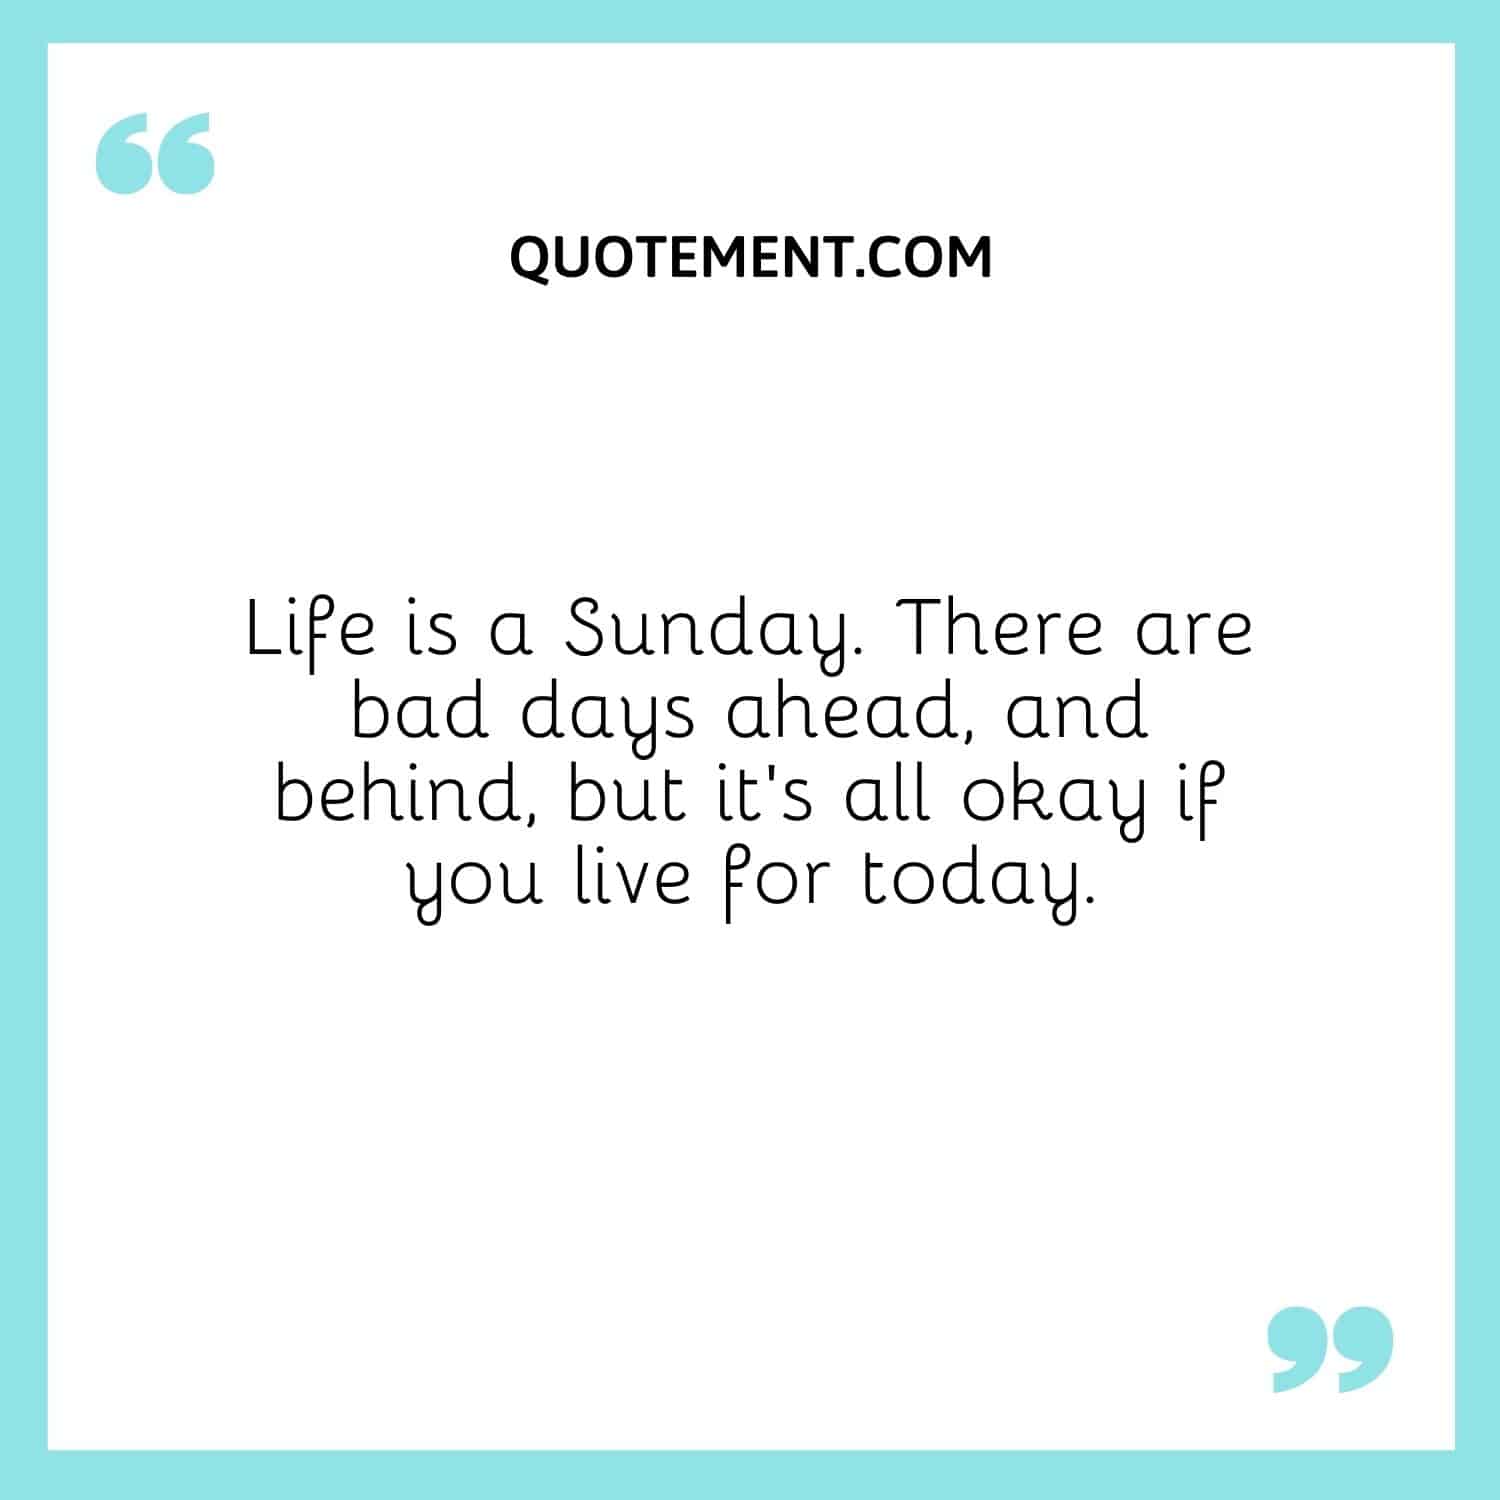 Life is a Sunday.